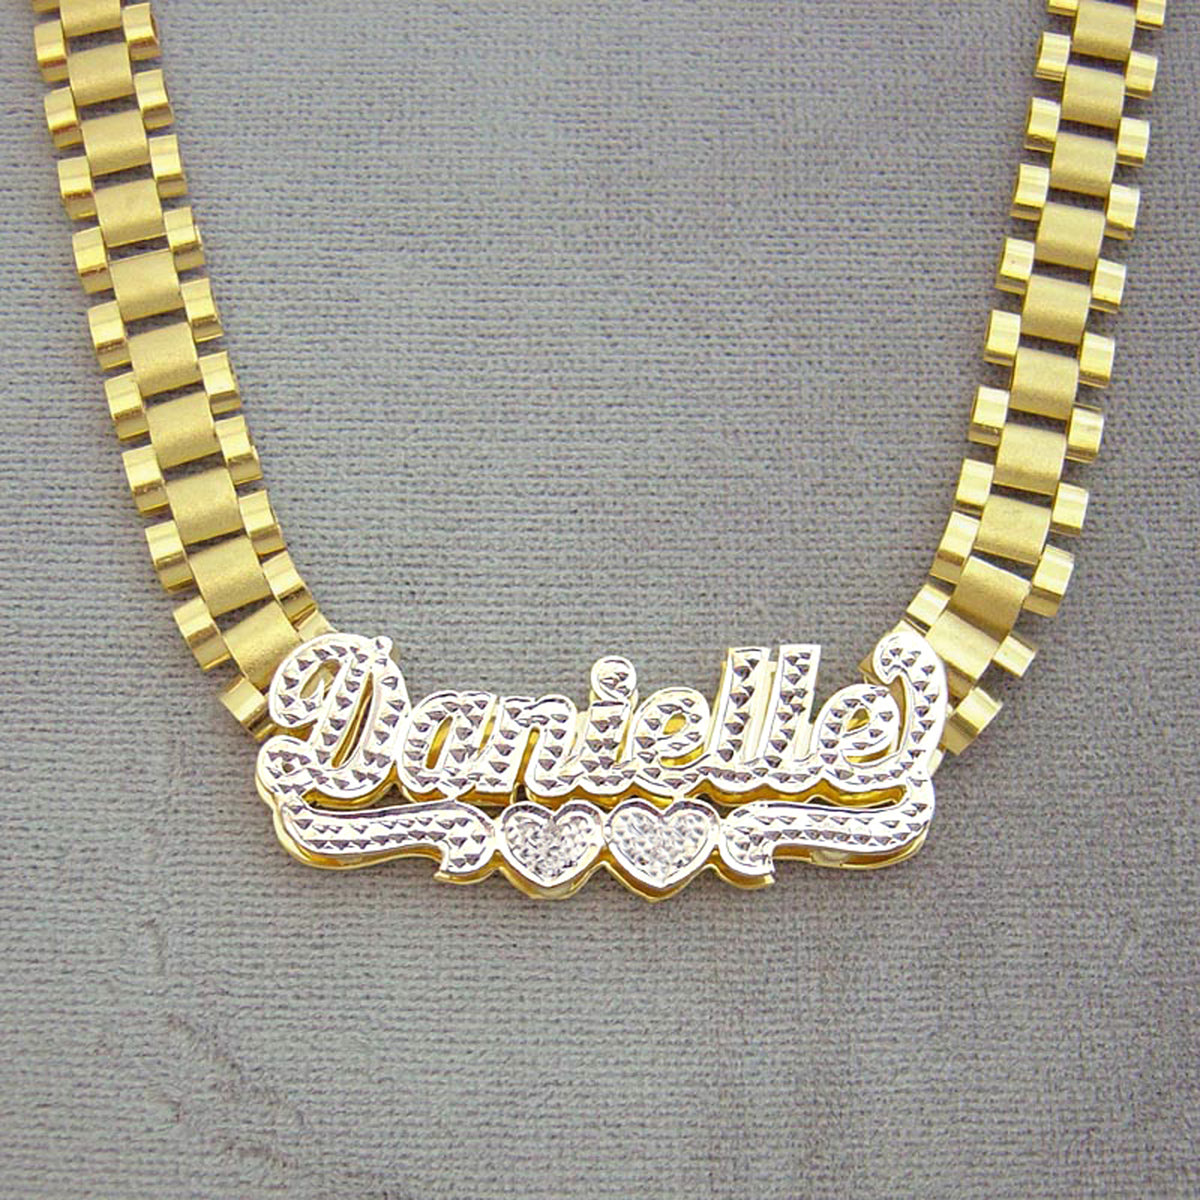 Personalized 10K Solid Gold Iced Out Name Necklace Chain 8 mm Watch-Band Style Link Chain